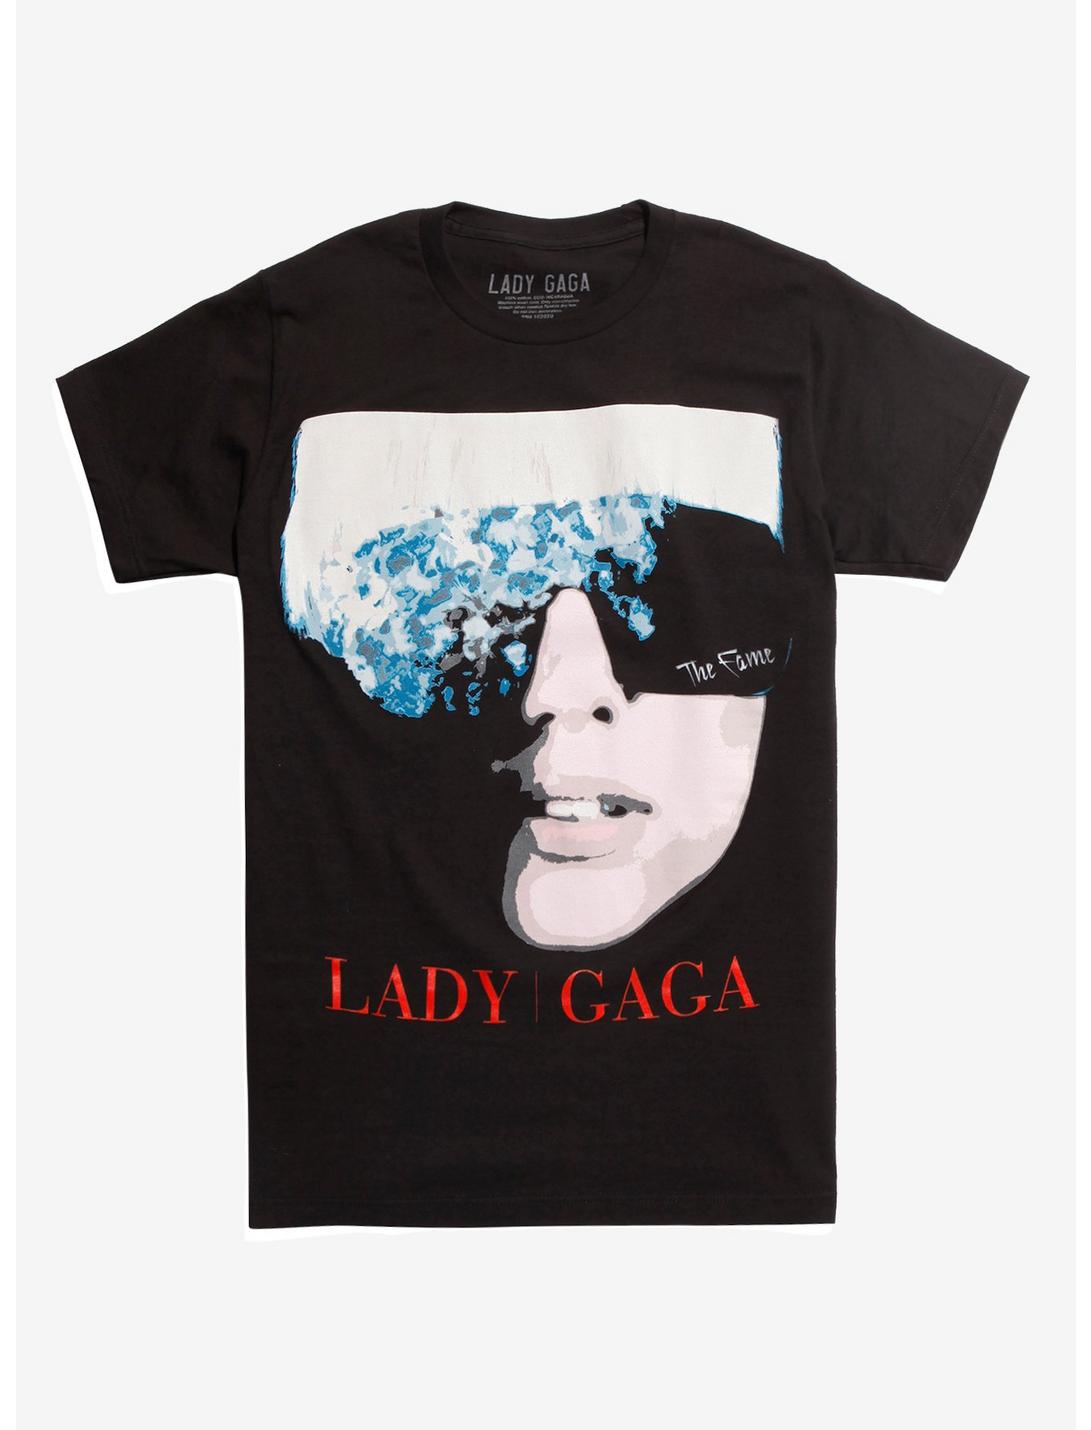 USA IMPORT LADY GAGA 'THE FAME' LADIES VEST OFFICIAL BAND MERCHANDISE SIZE 6 